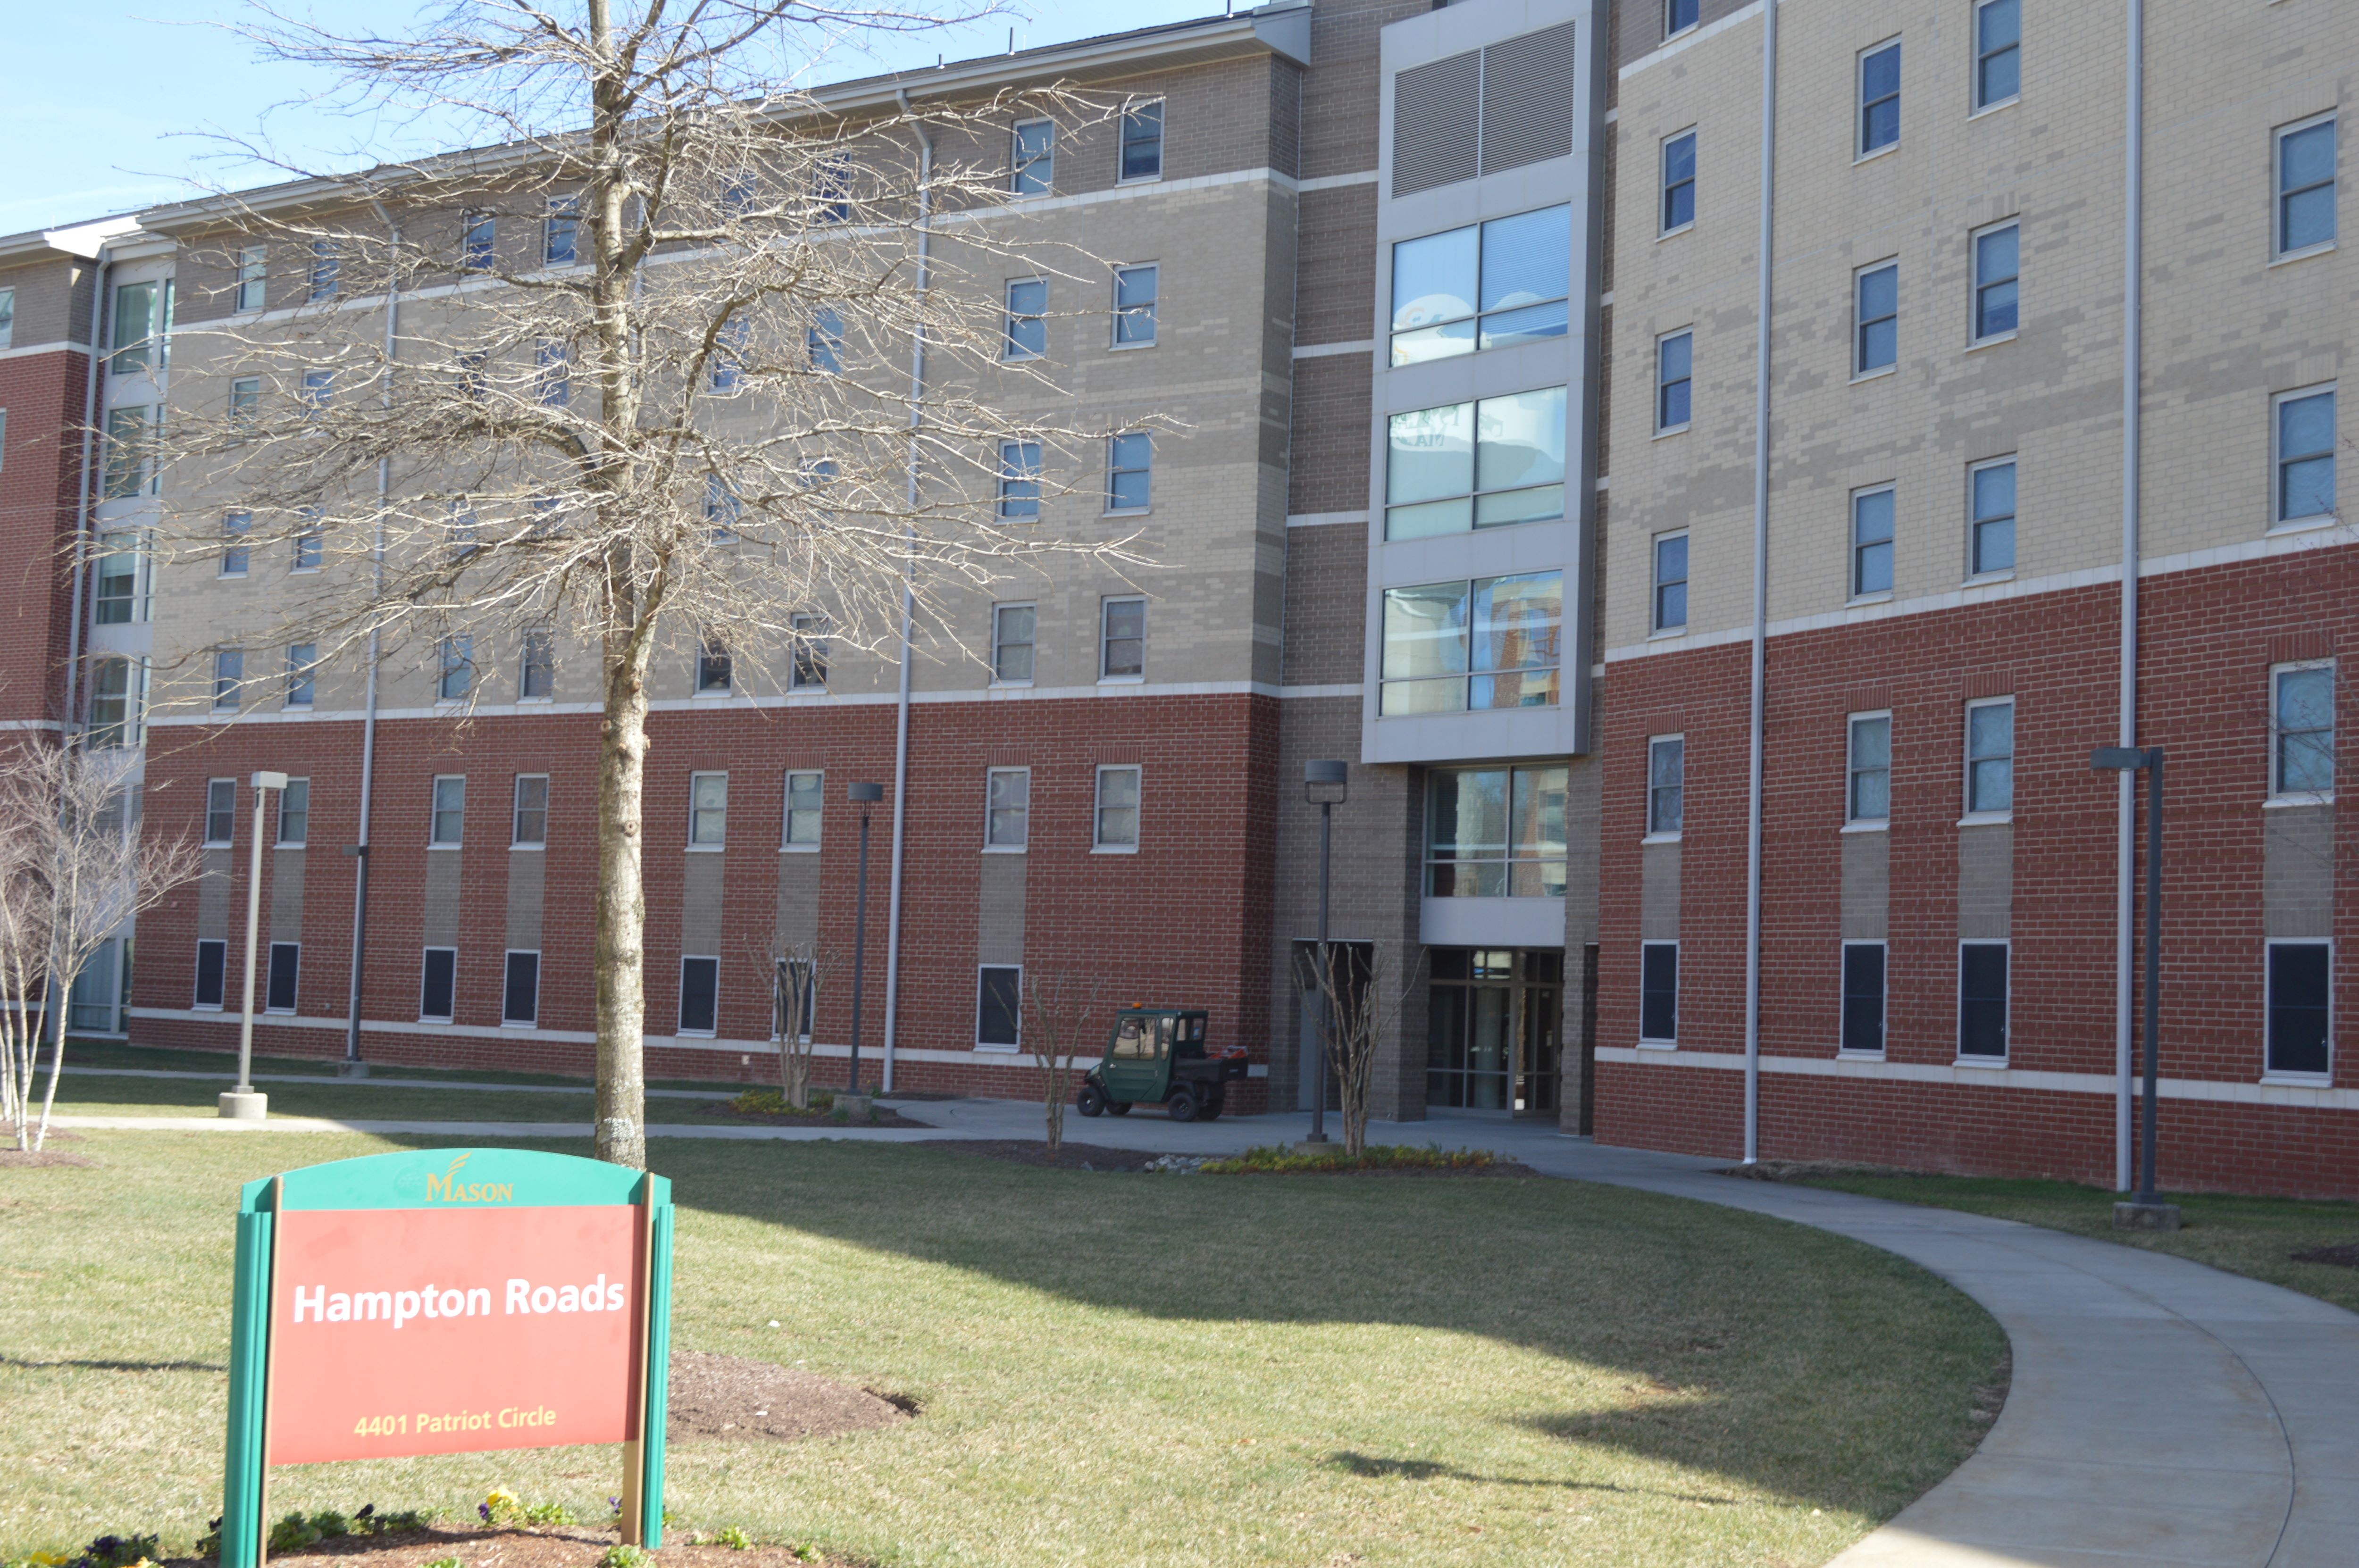 Hampton Road, housing and Residence Life, exterior building